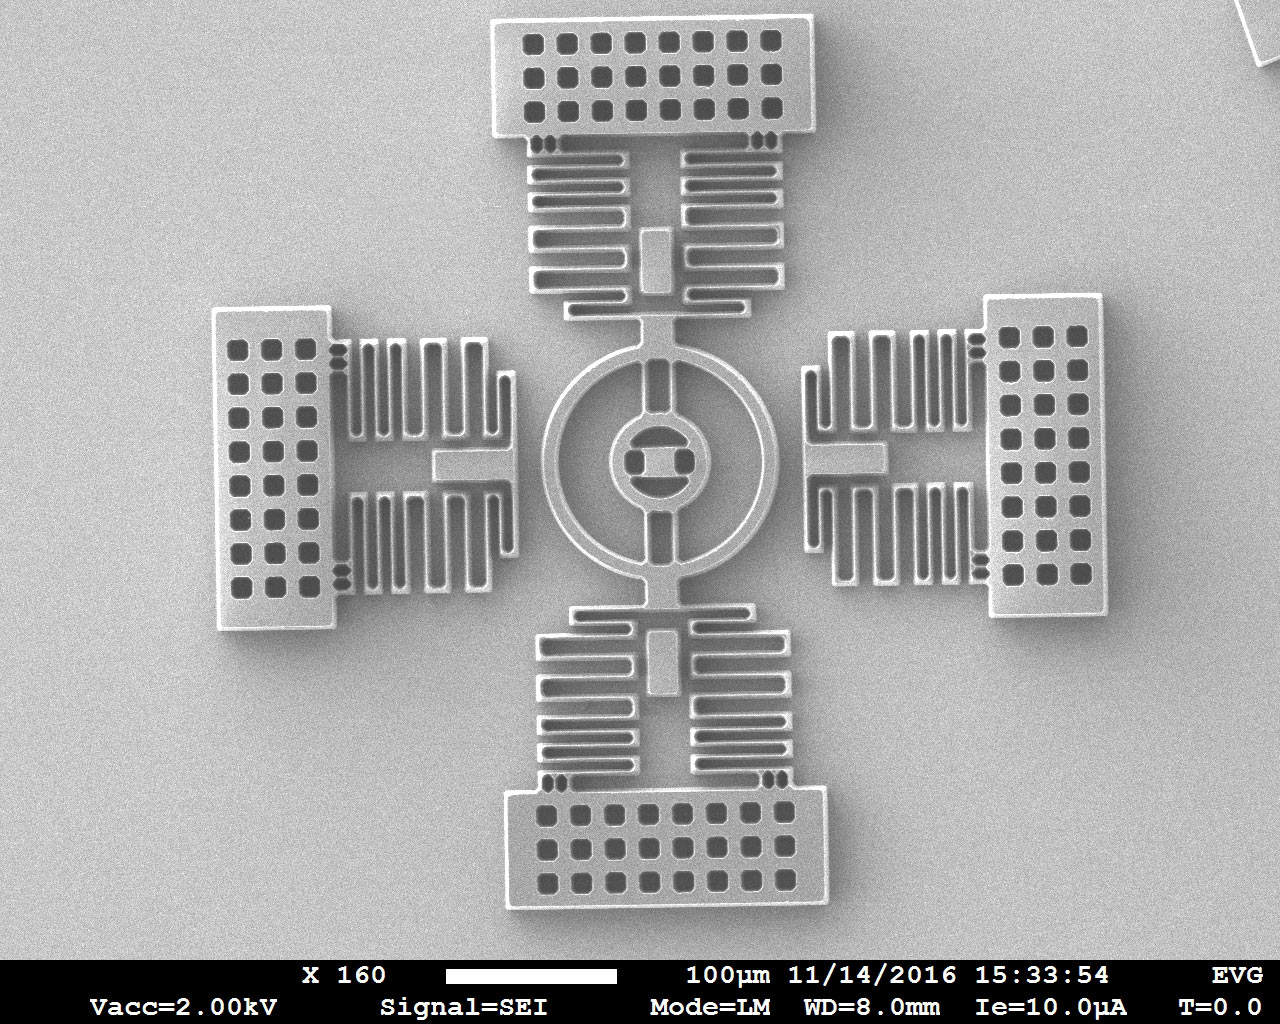 MEMS structures patterned in 20 µm thick resist.